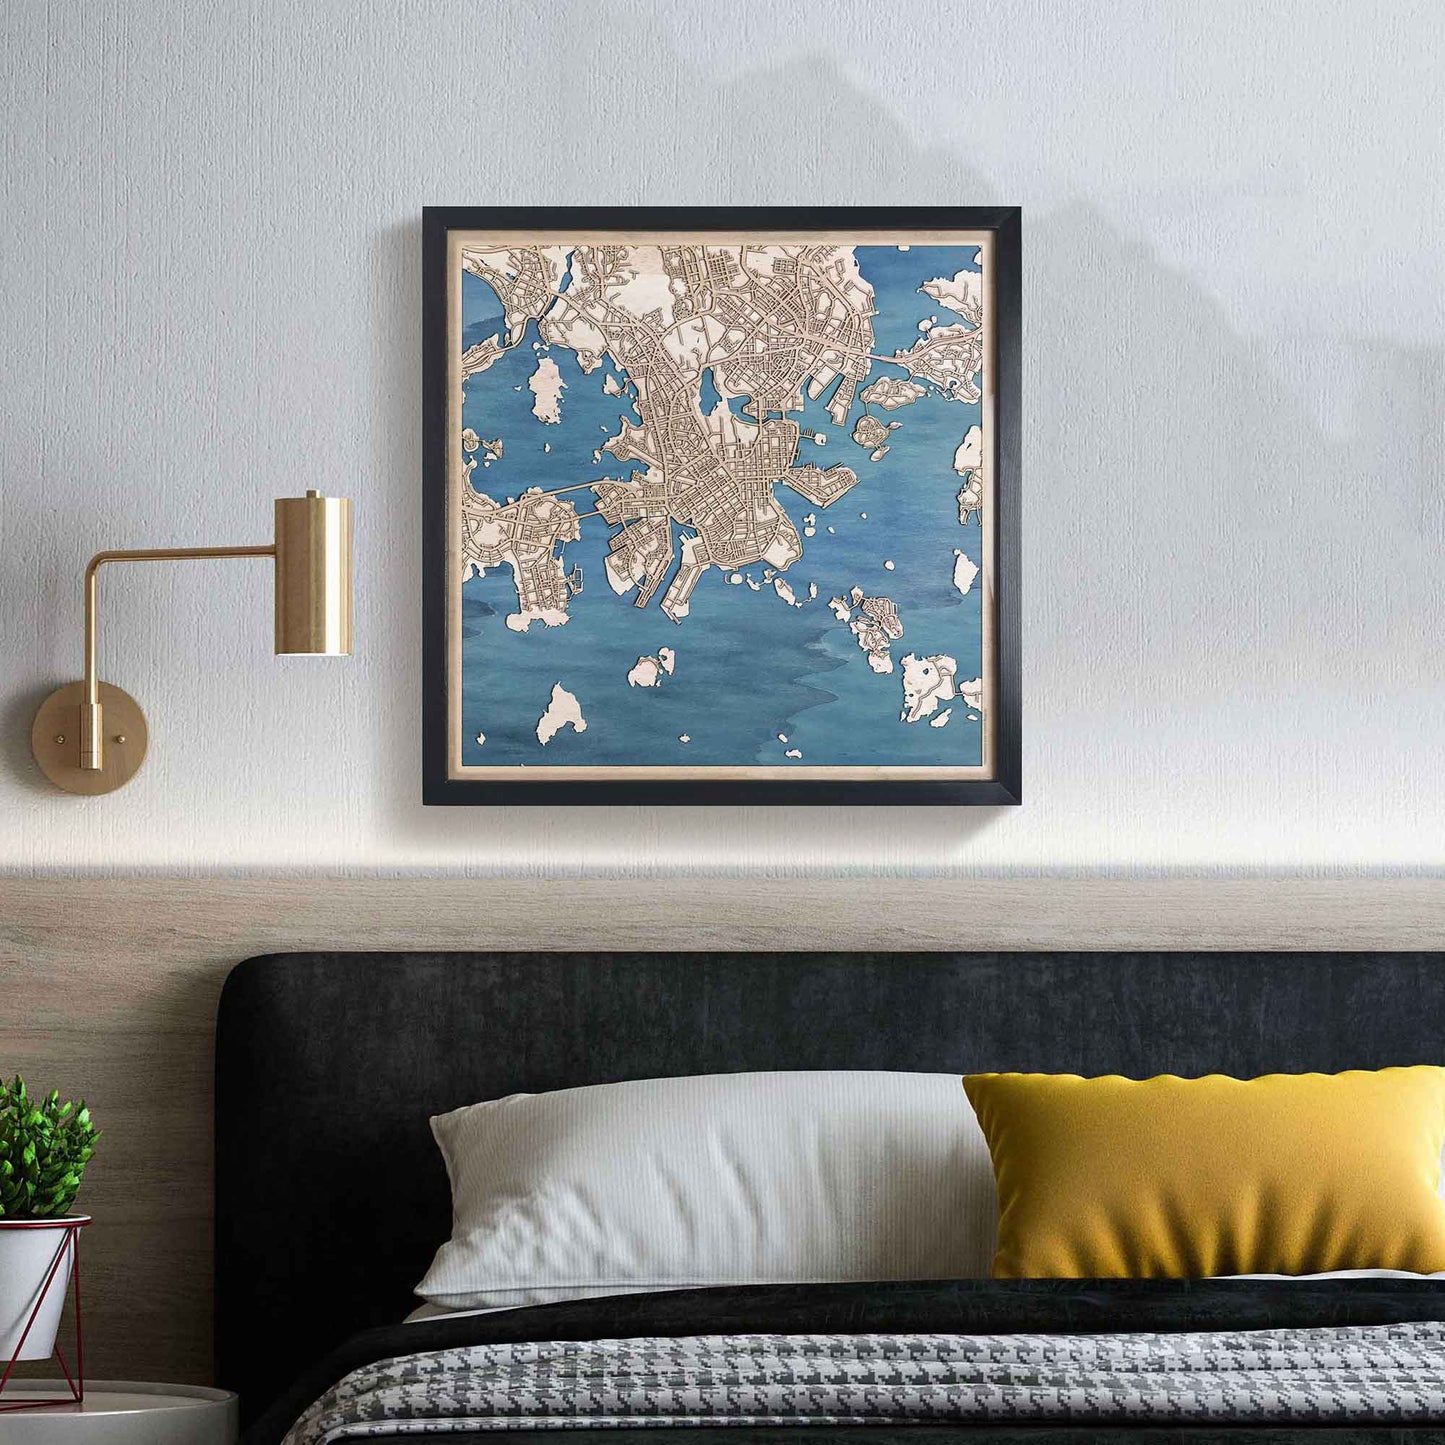 Helsinki Wooden Map by CityWood - Custom Wood Map Art - Unique Laser Cut Engraved - Anniversary Gift